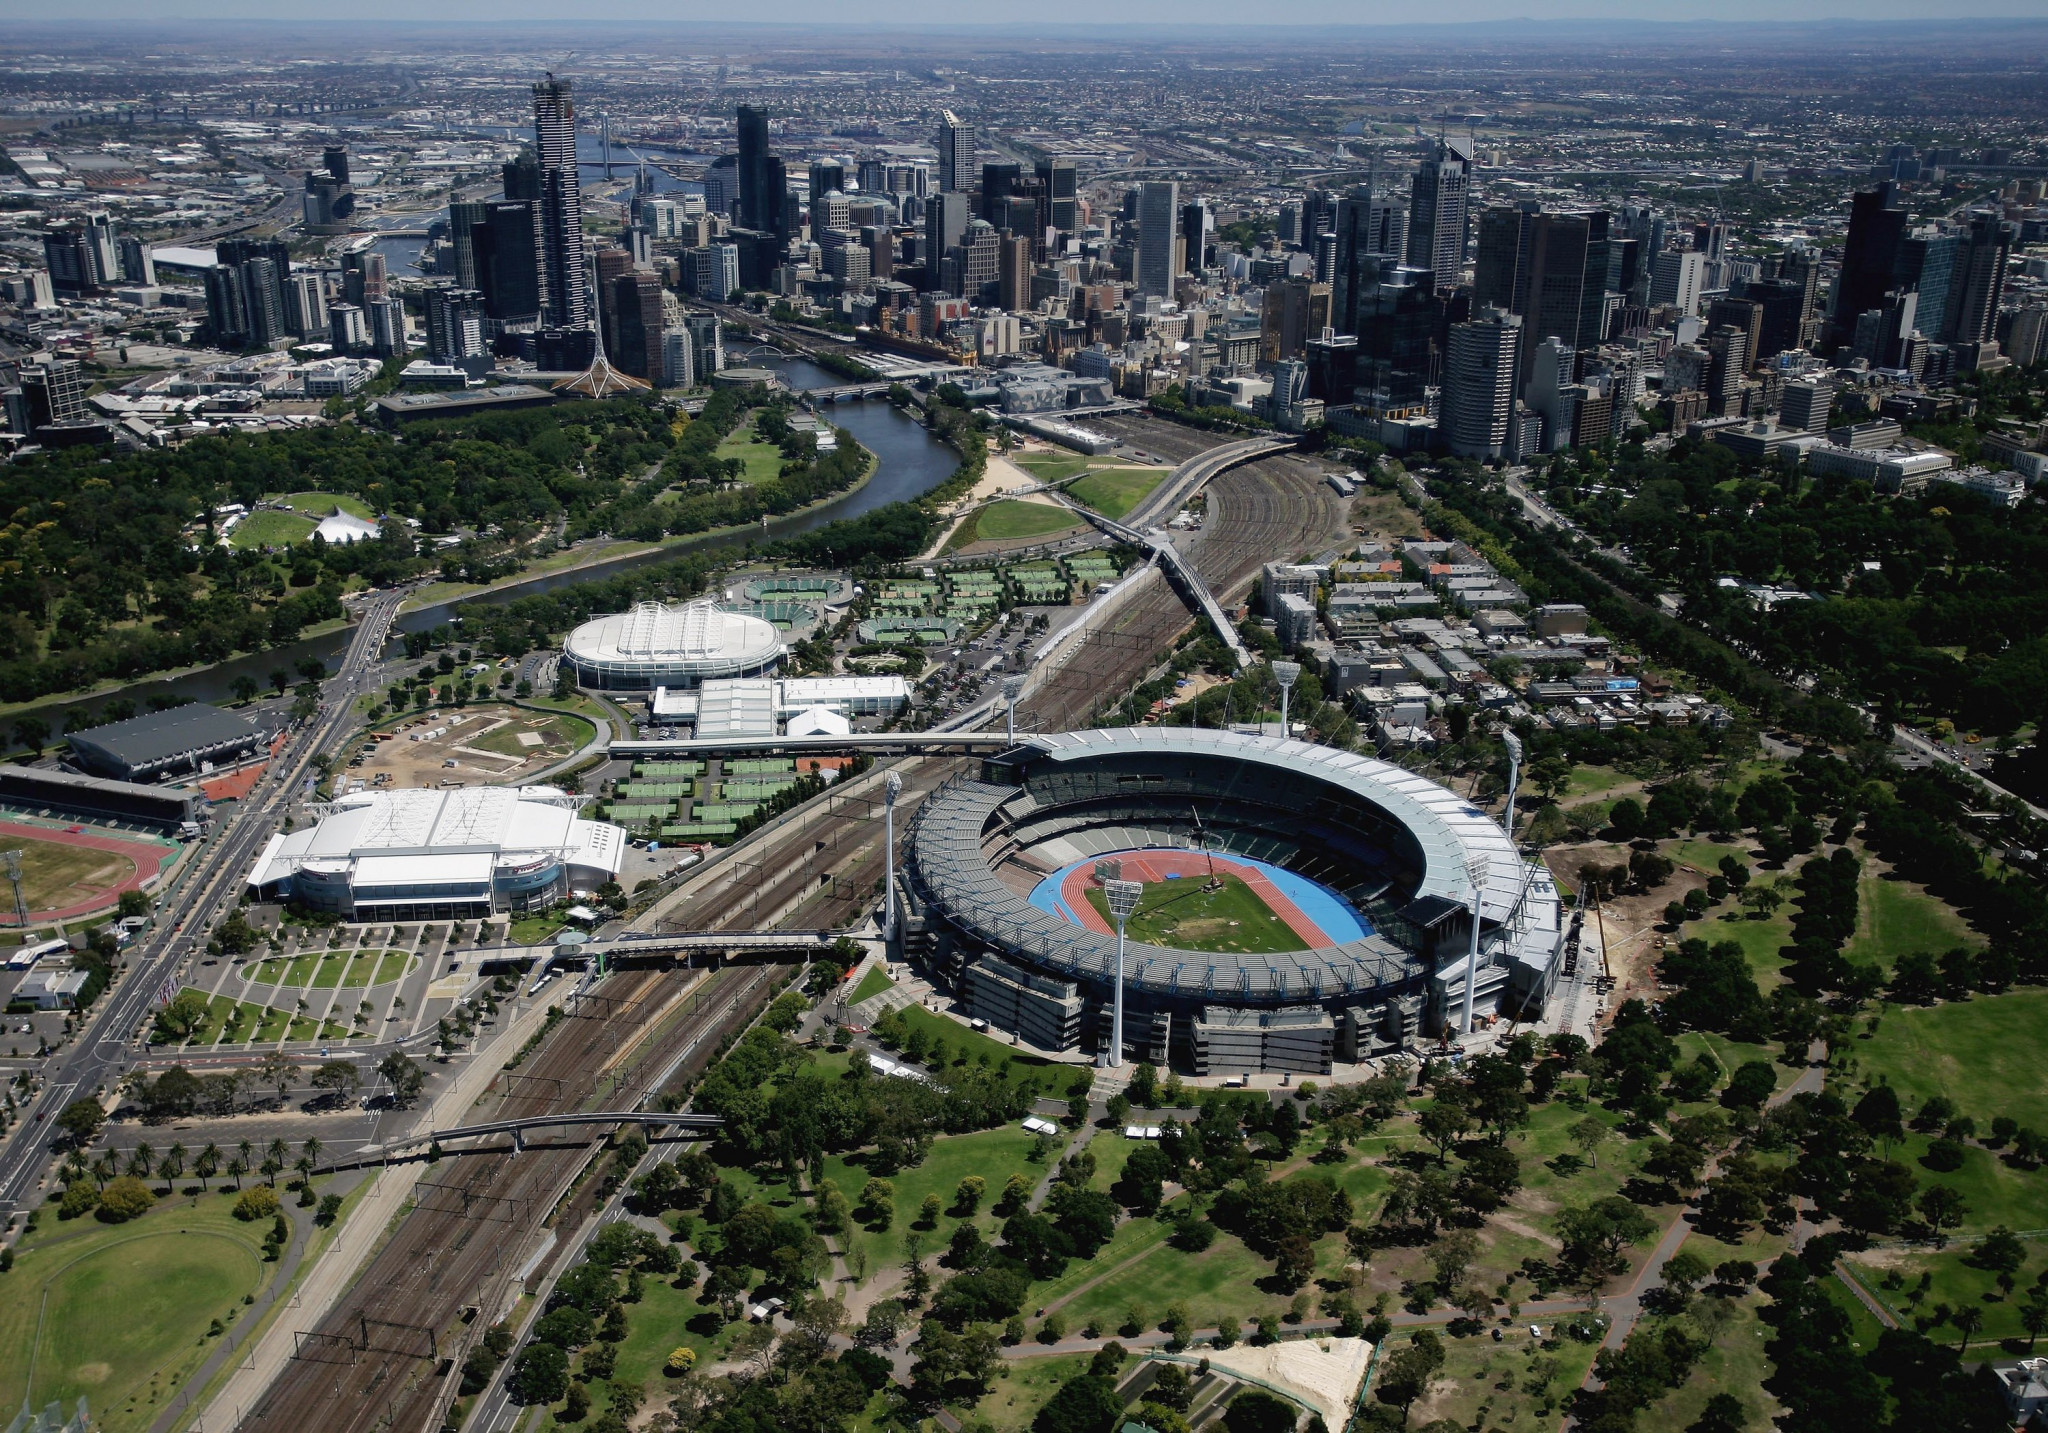 AUD$2.6 billion has been budgeted for rural Victoria in preparation for the 2026 Commonwealth Games ©Getty Images